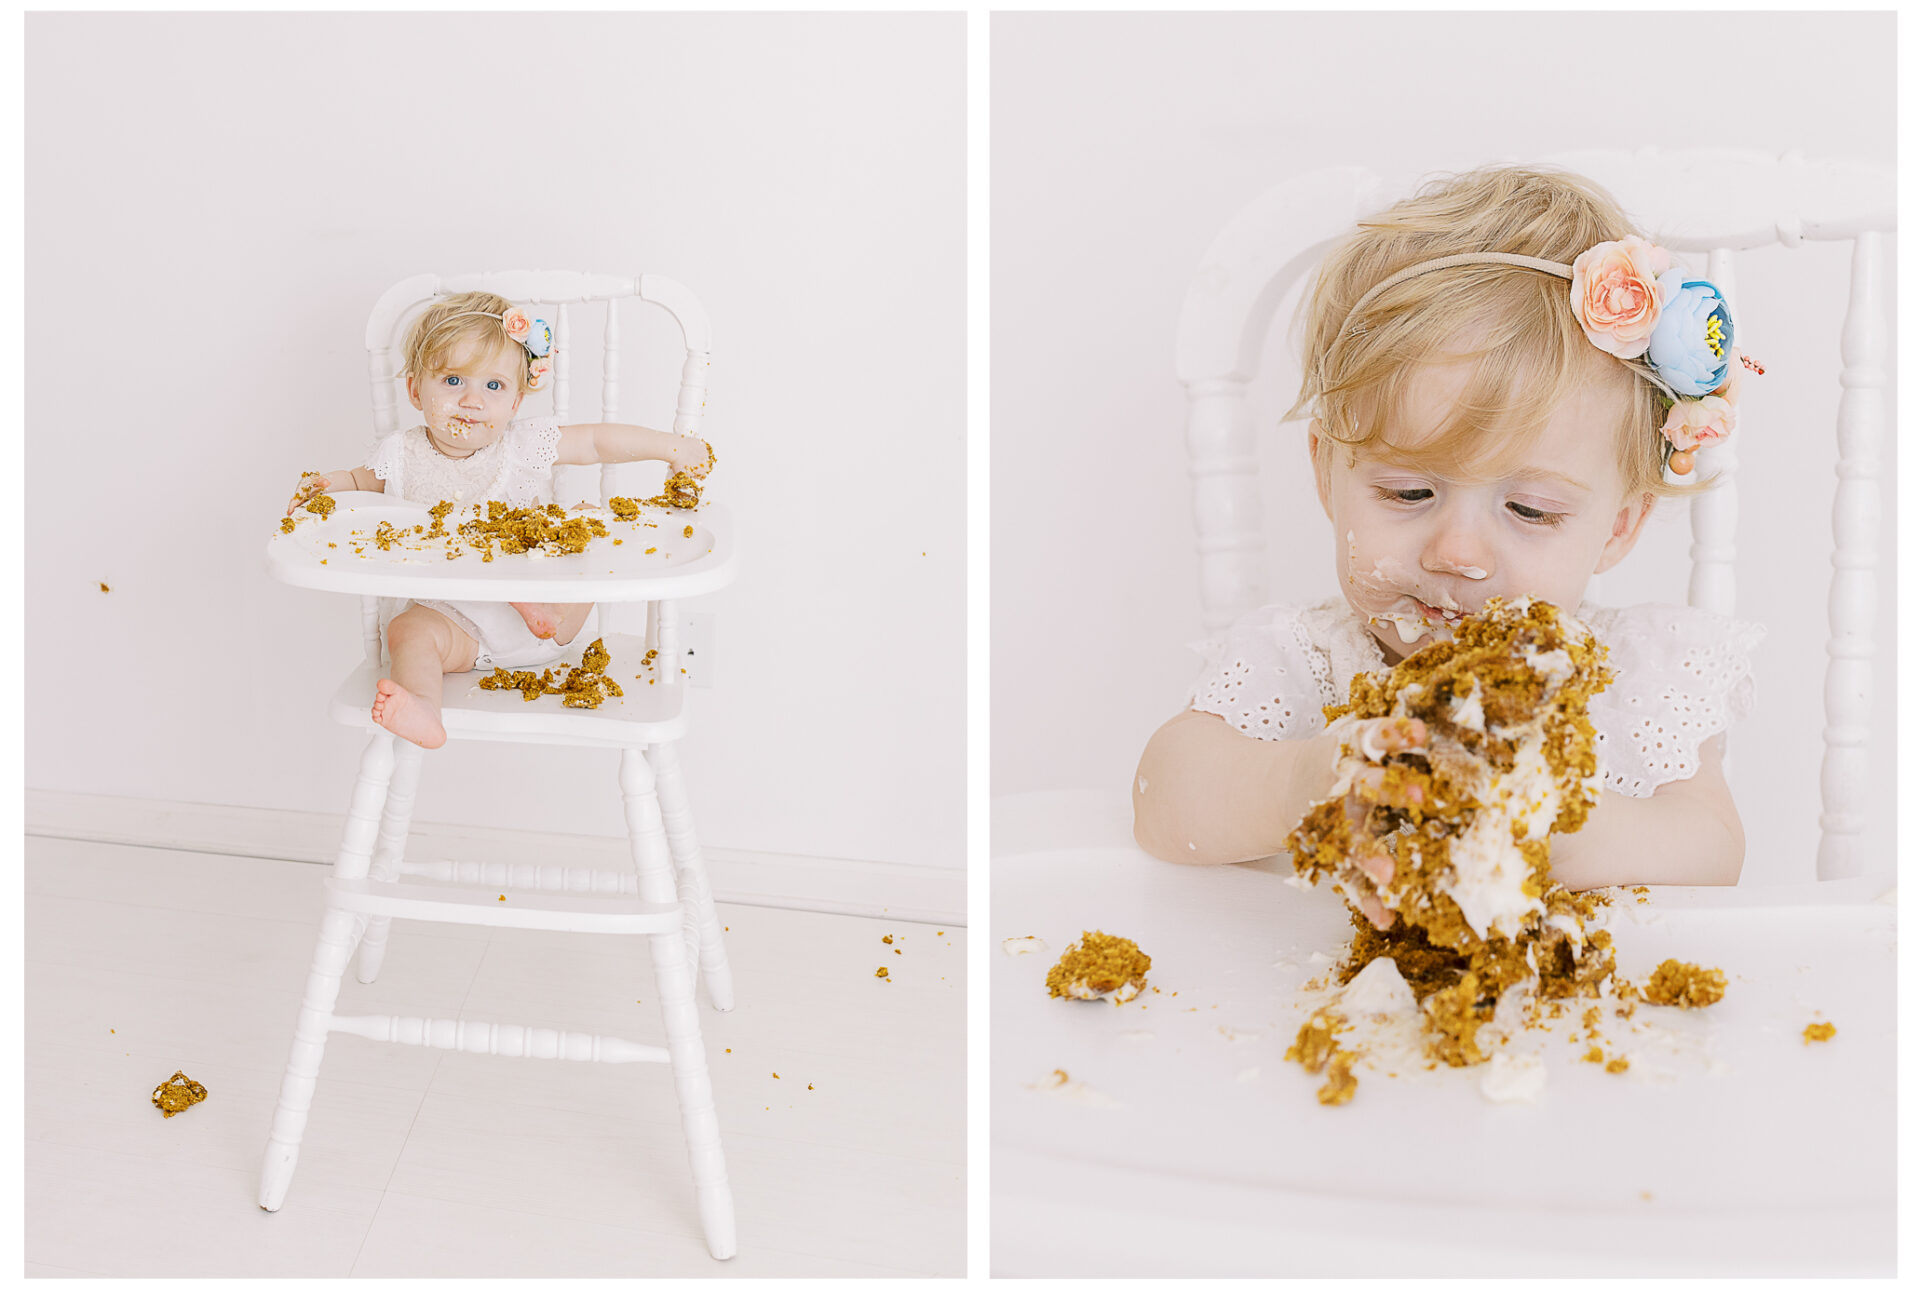 Winter Freire Photography | First birthday photos for baby girl in a photography studio eating her smash cake